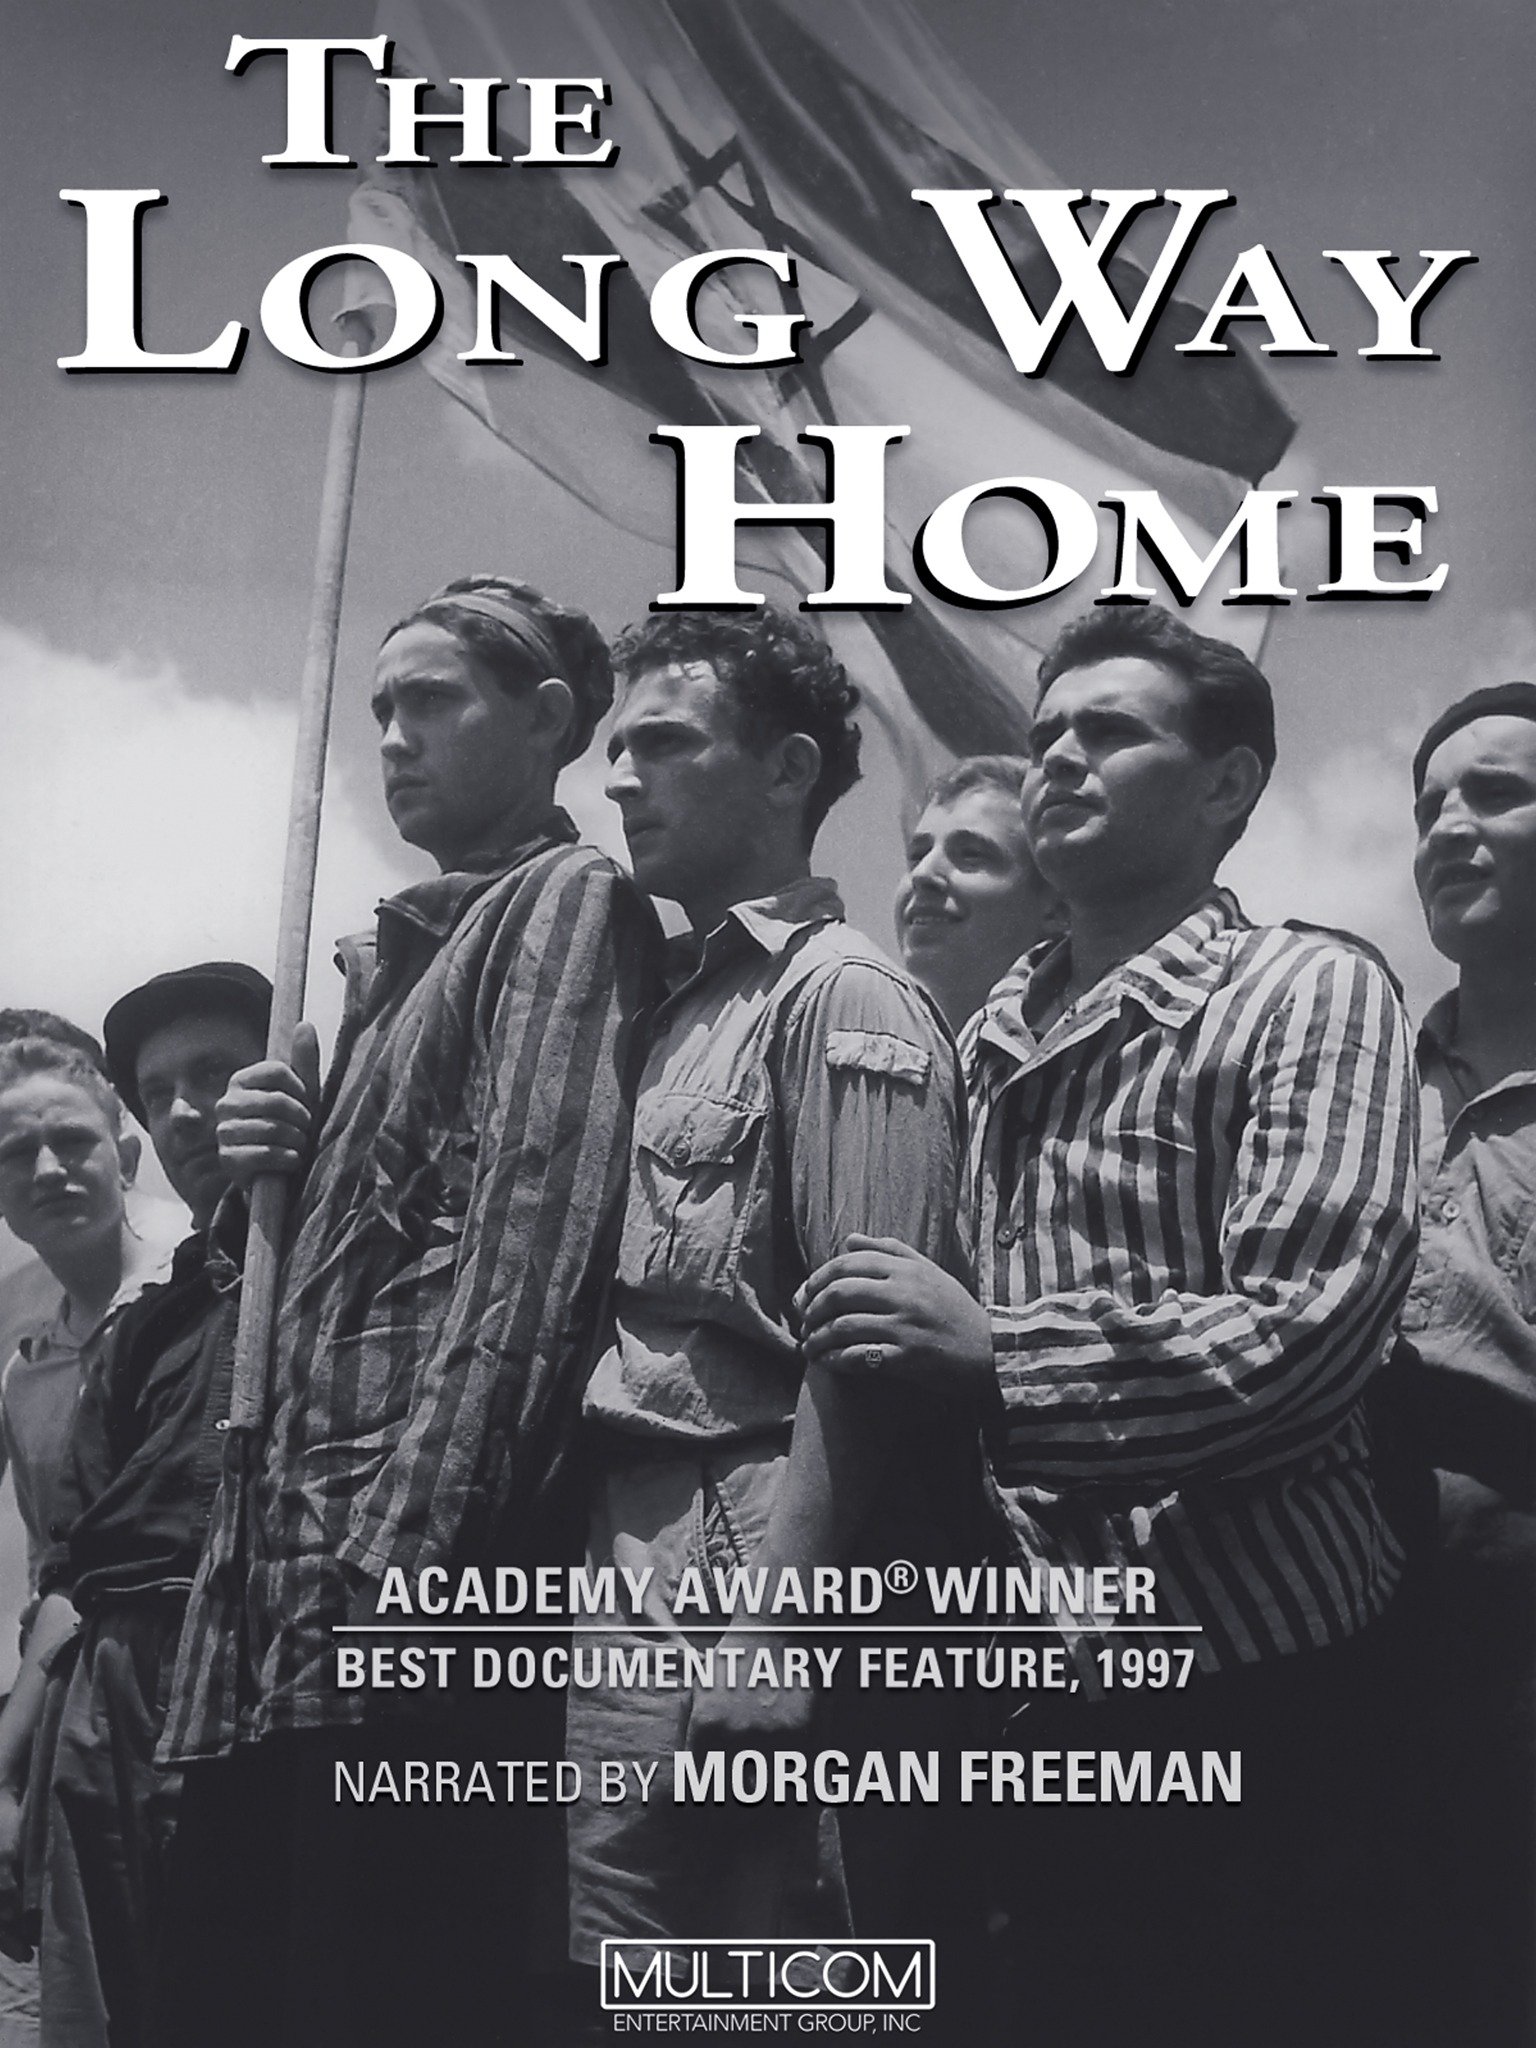 a long way home movie 2016